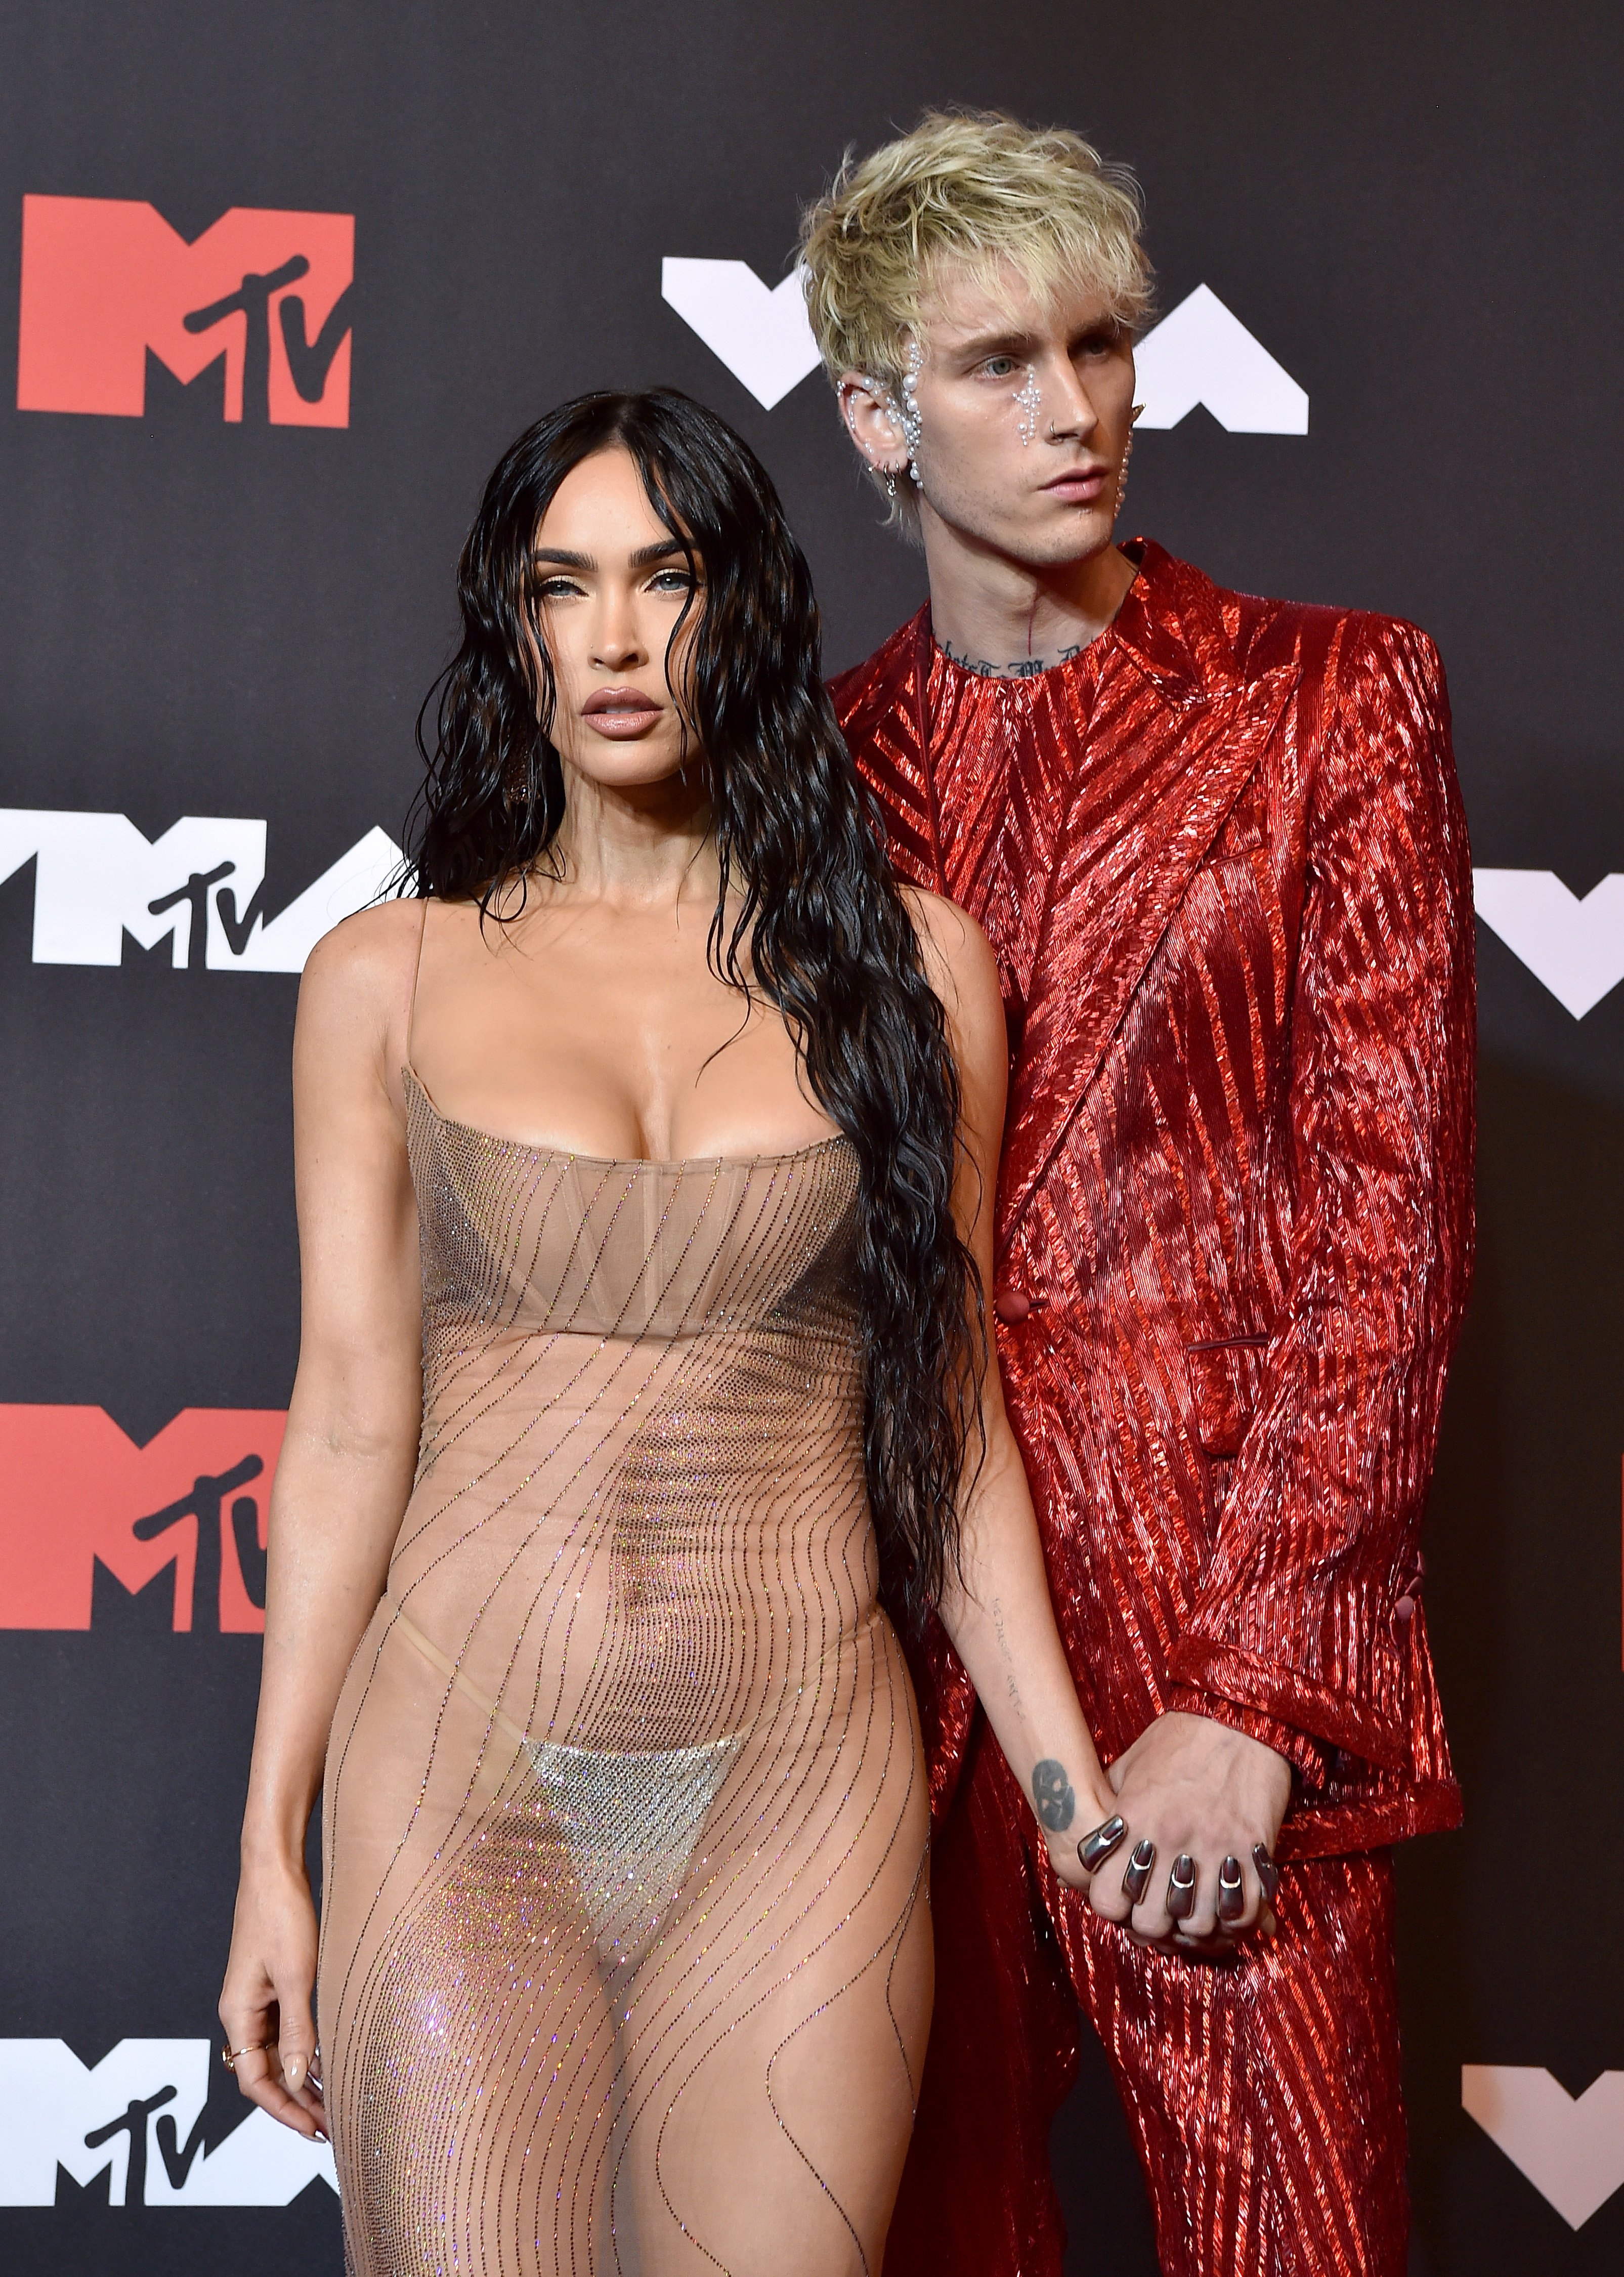 Megan Fox and Machine Gun Kelly at the 2021 MTV Video Music Awards at Barclays Center on September 12, 2021 | Photo: Getty Images